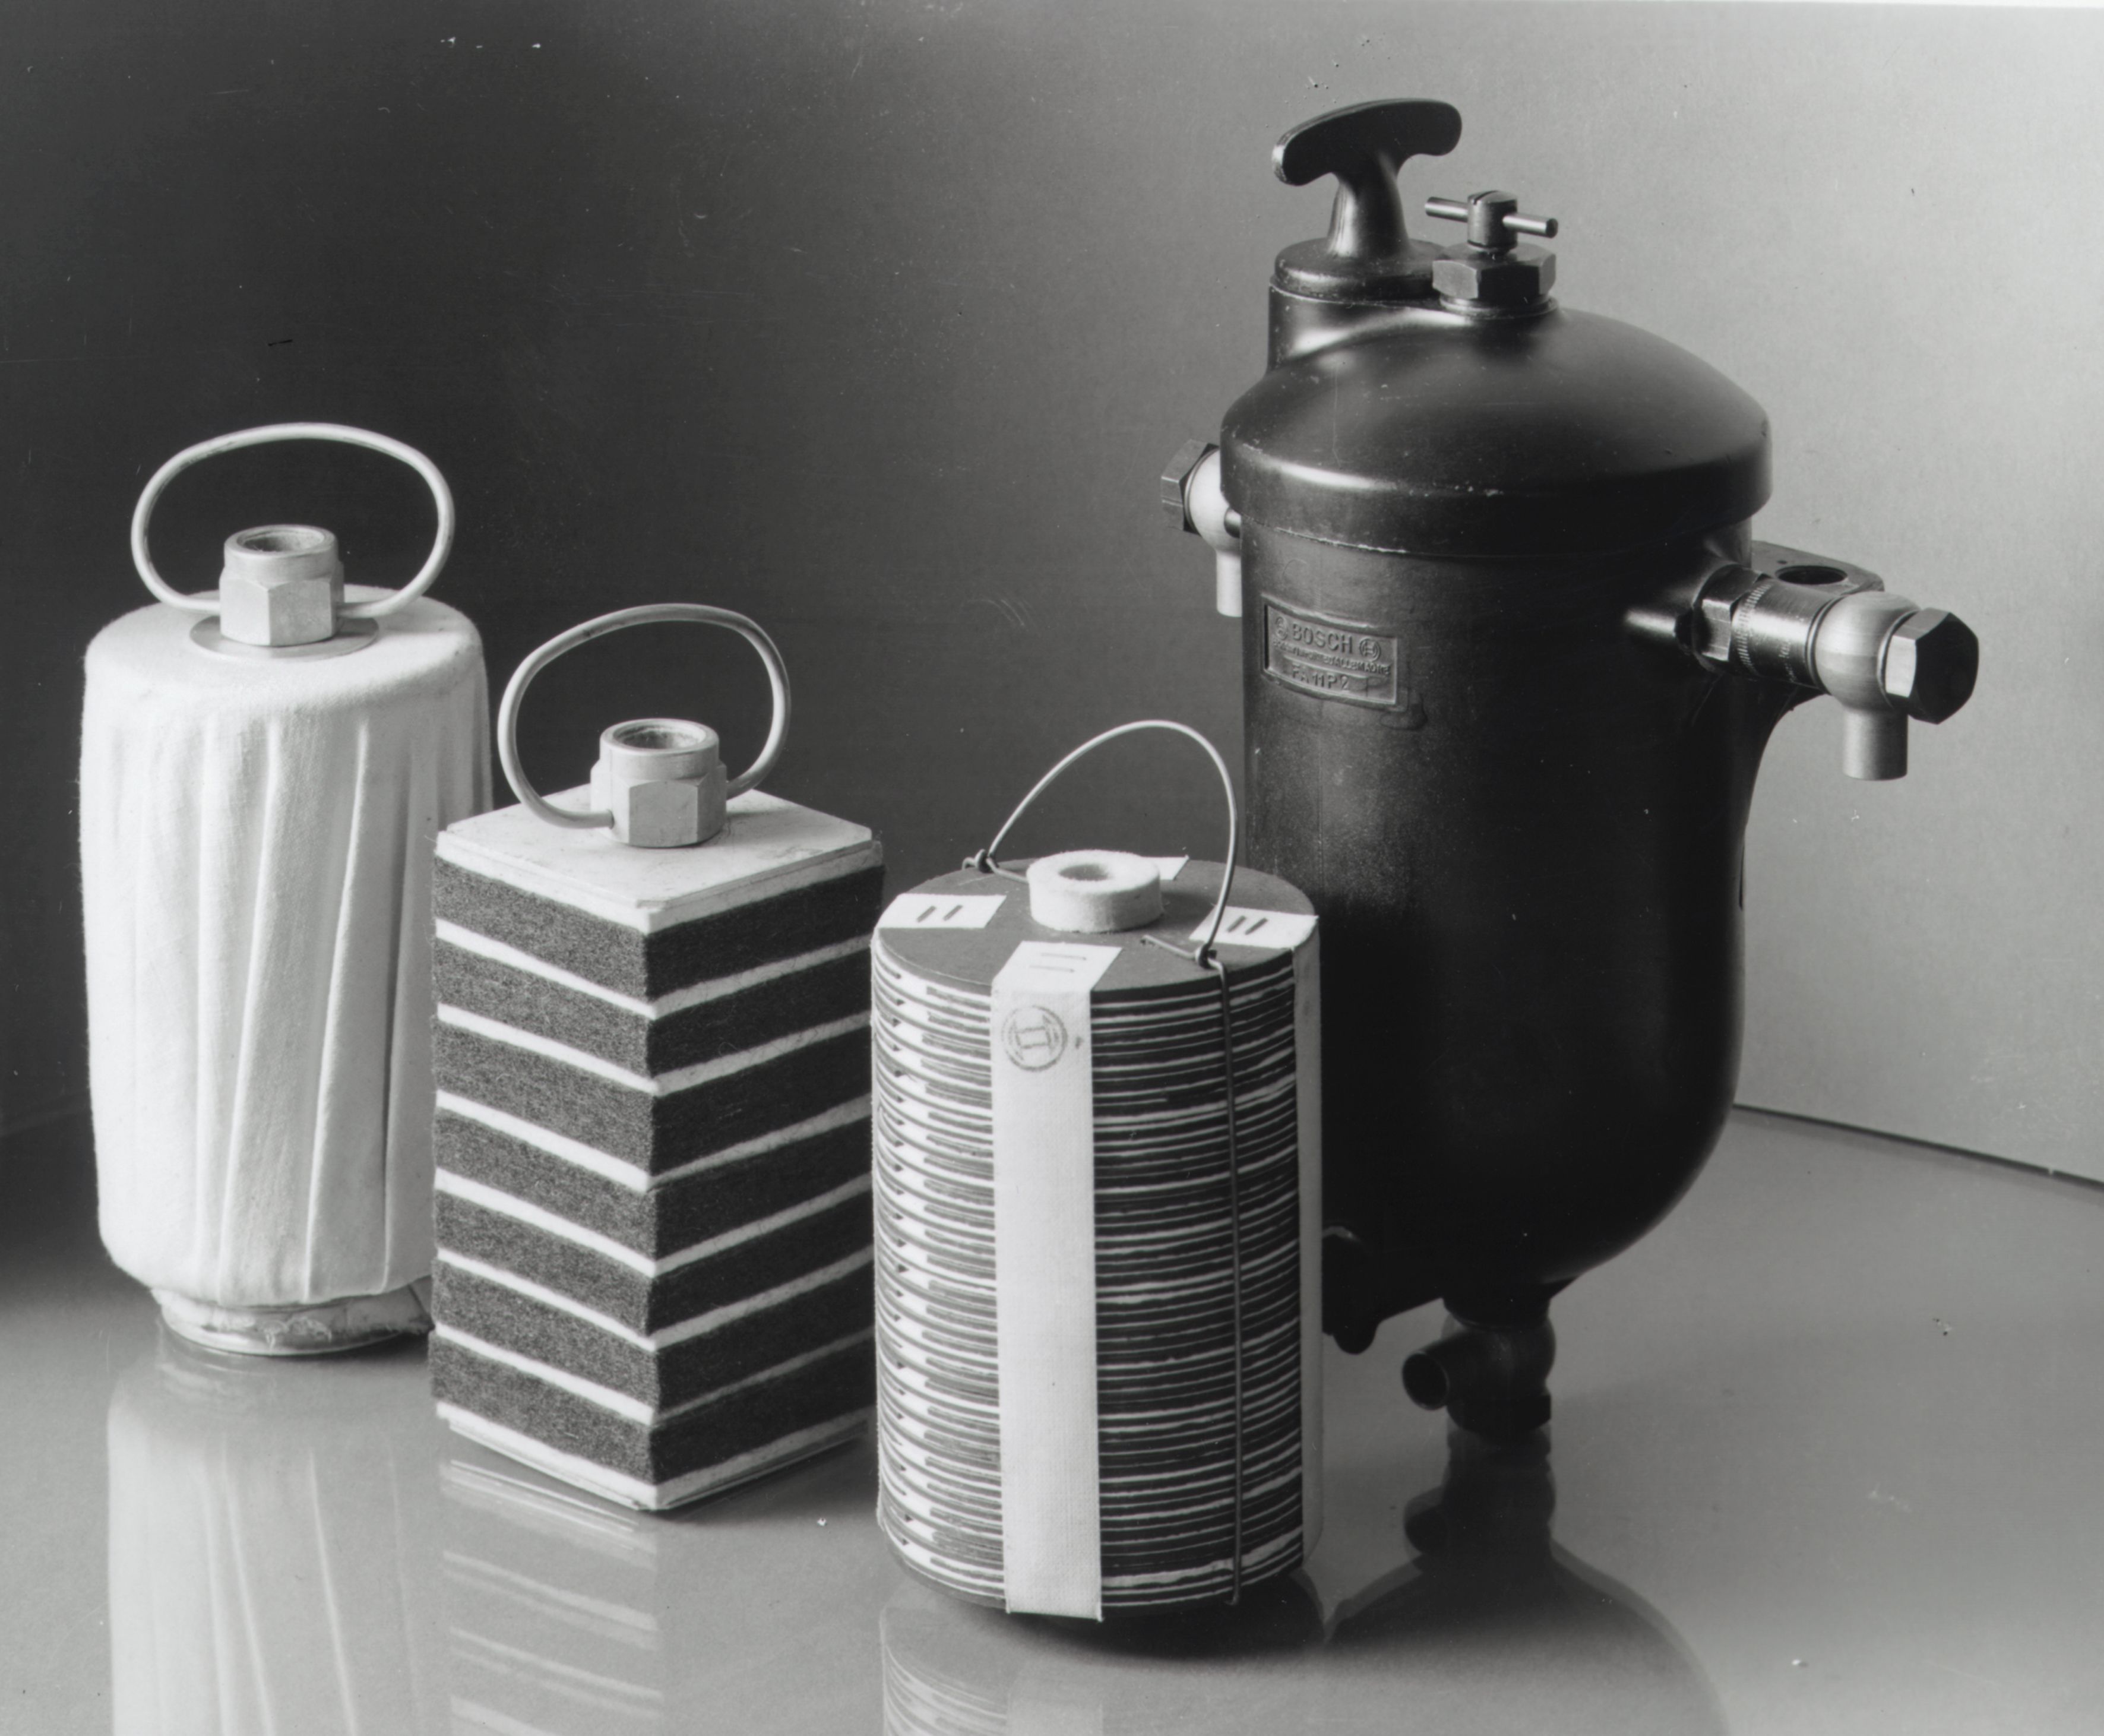 Historic product photo from 1939: Bosch fuel filter with different inserts